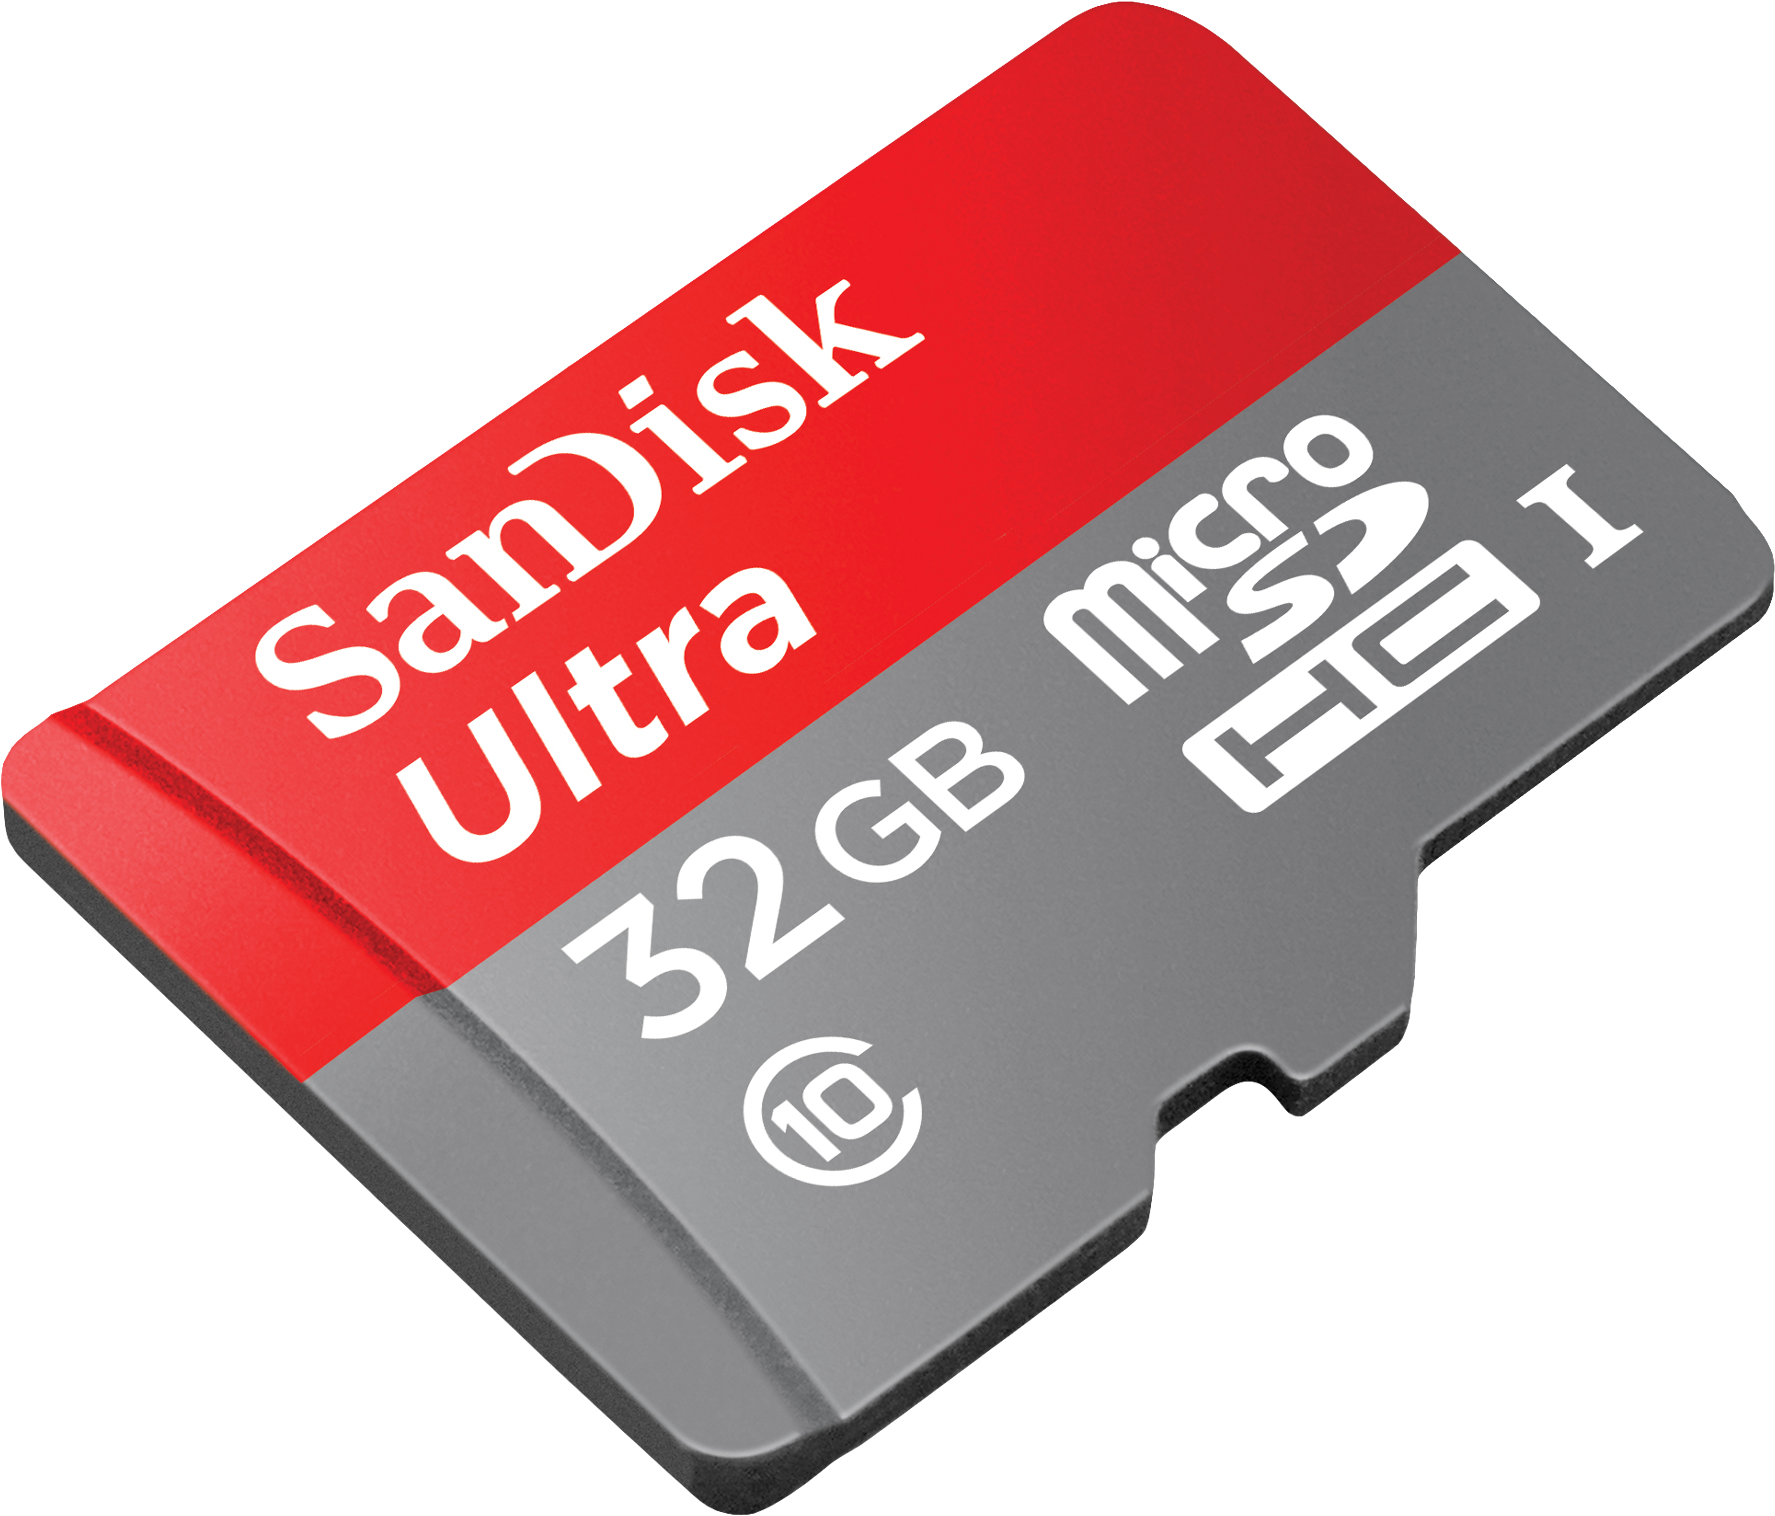 A Memory Card With A Red And Grey Color